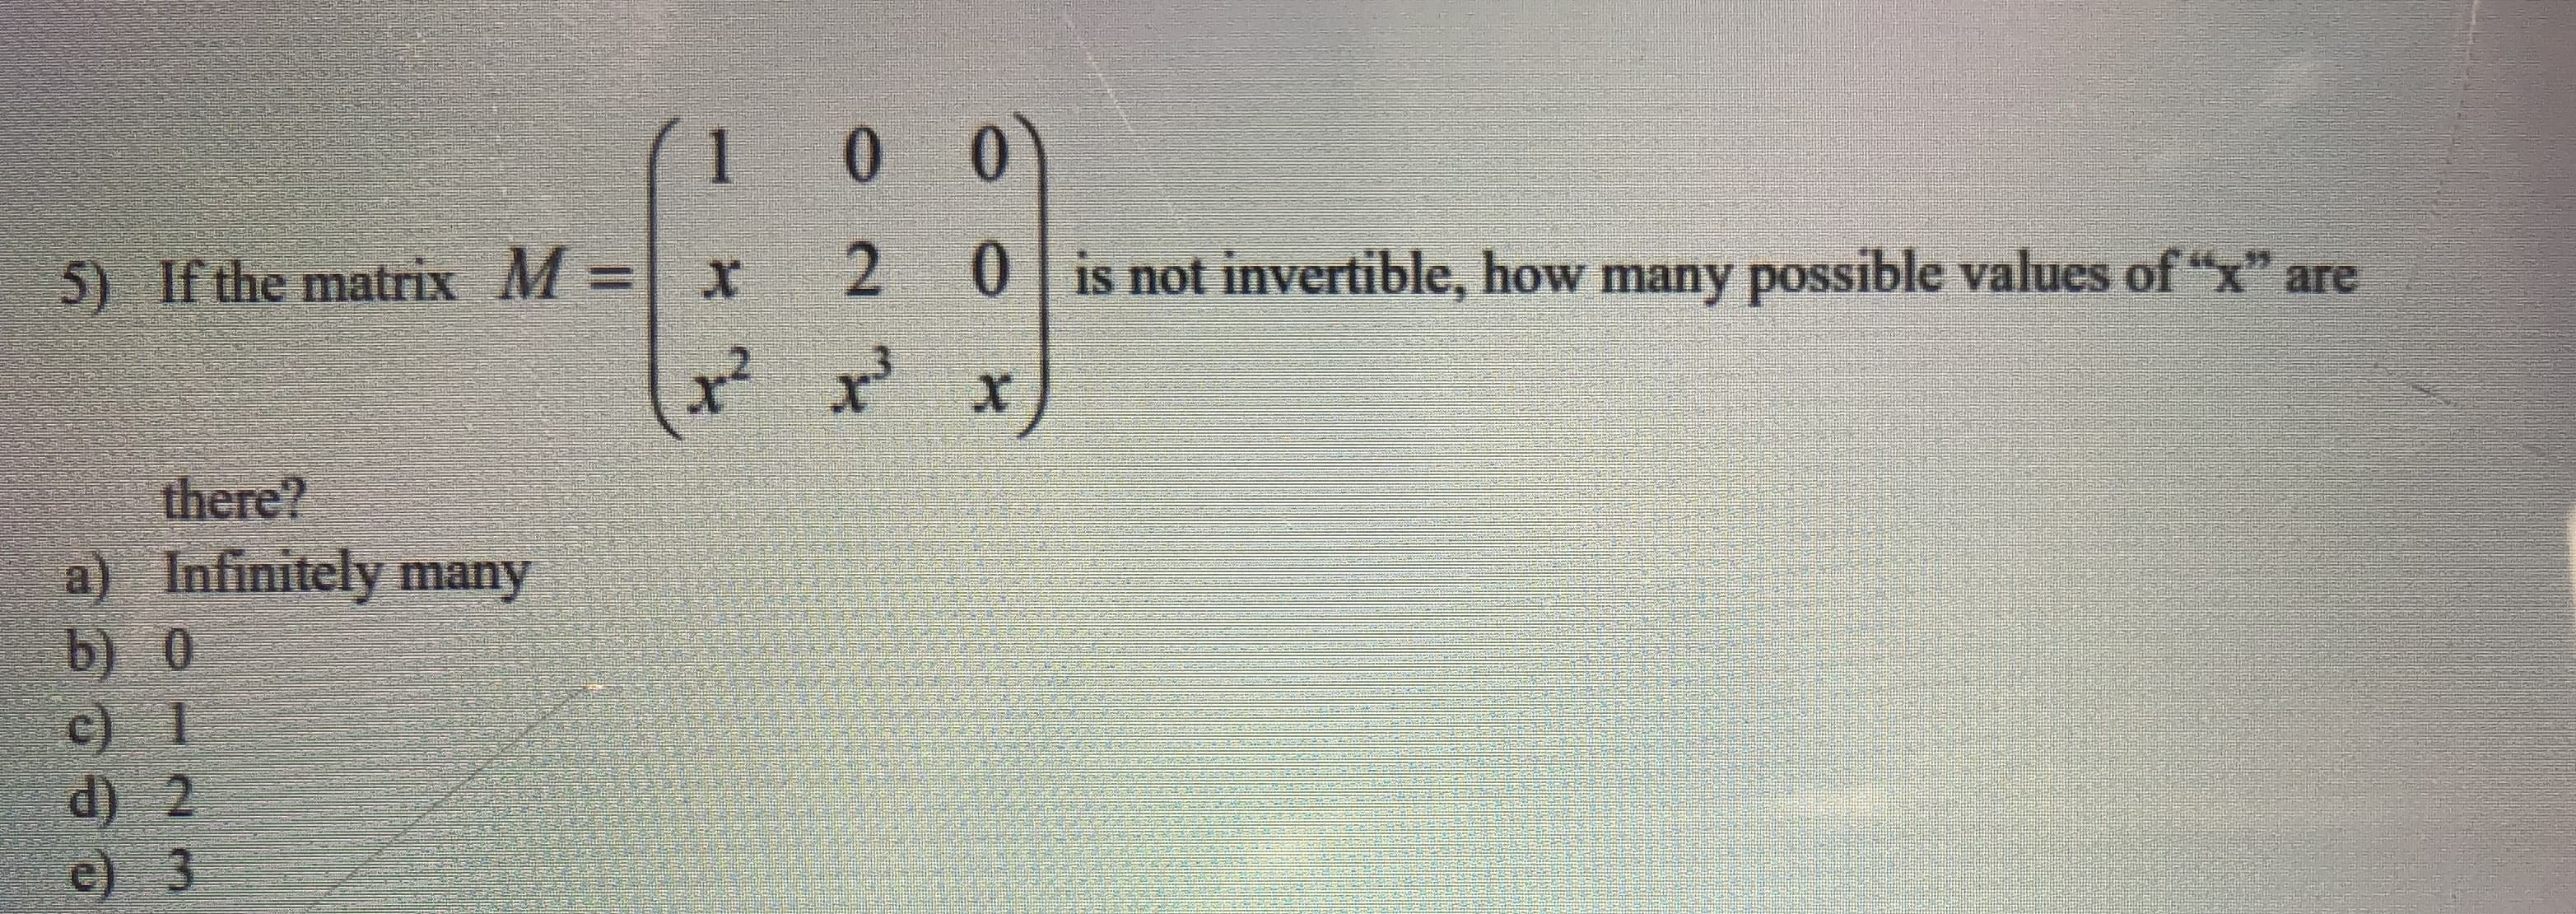 1
0 0
5) If the matrix M=x
2
0 is not invertible, how many possible values of "x" are
there?
a) Infinitely many
b) 0
c) 1
d) 2
e) 3
